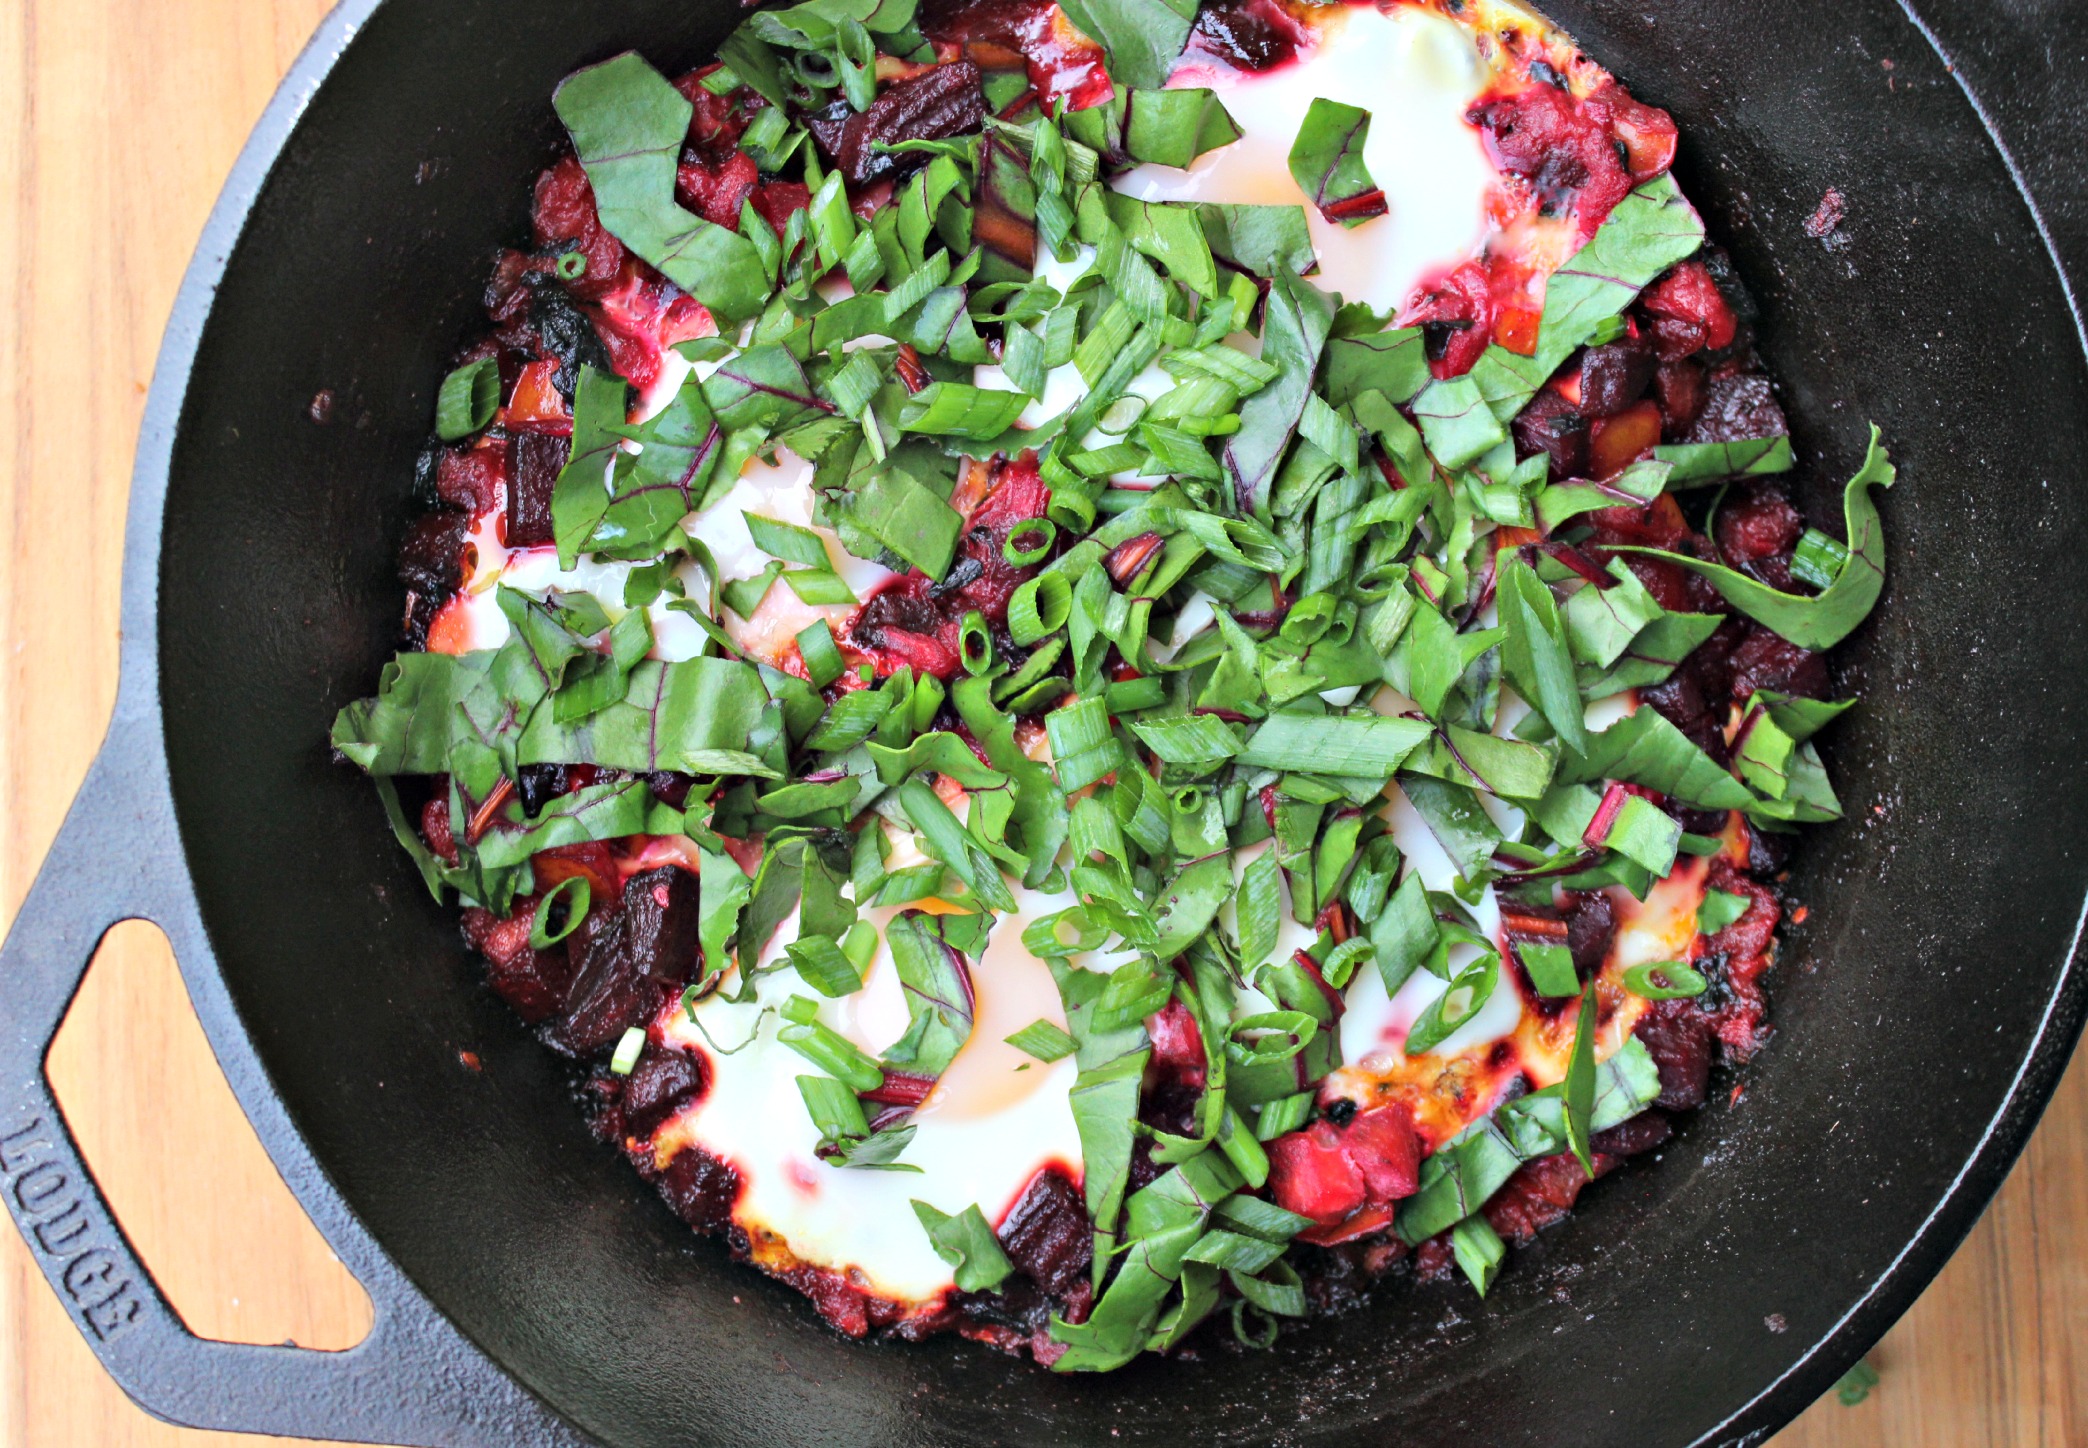 Beet Shakshuka Recipe from Two Moms in the Raw cookbook